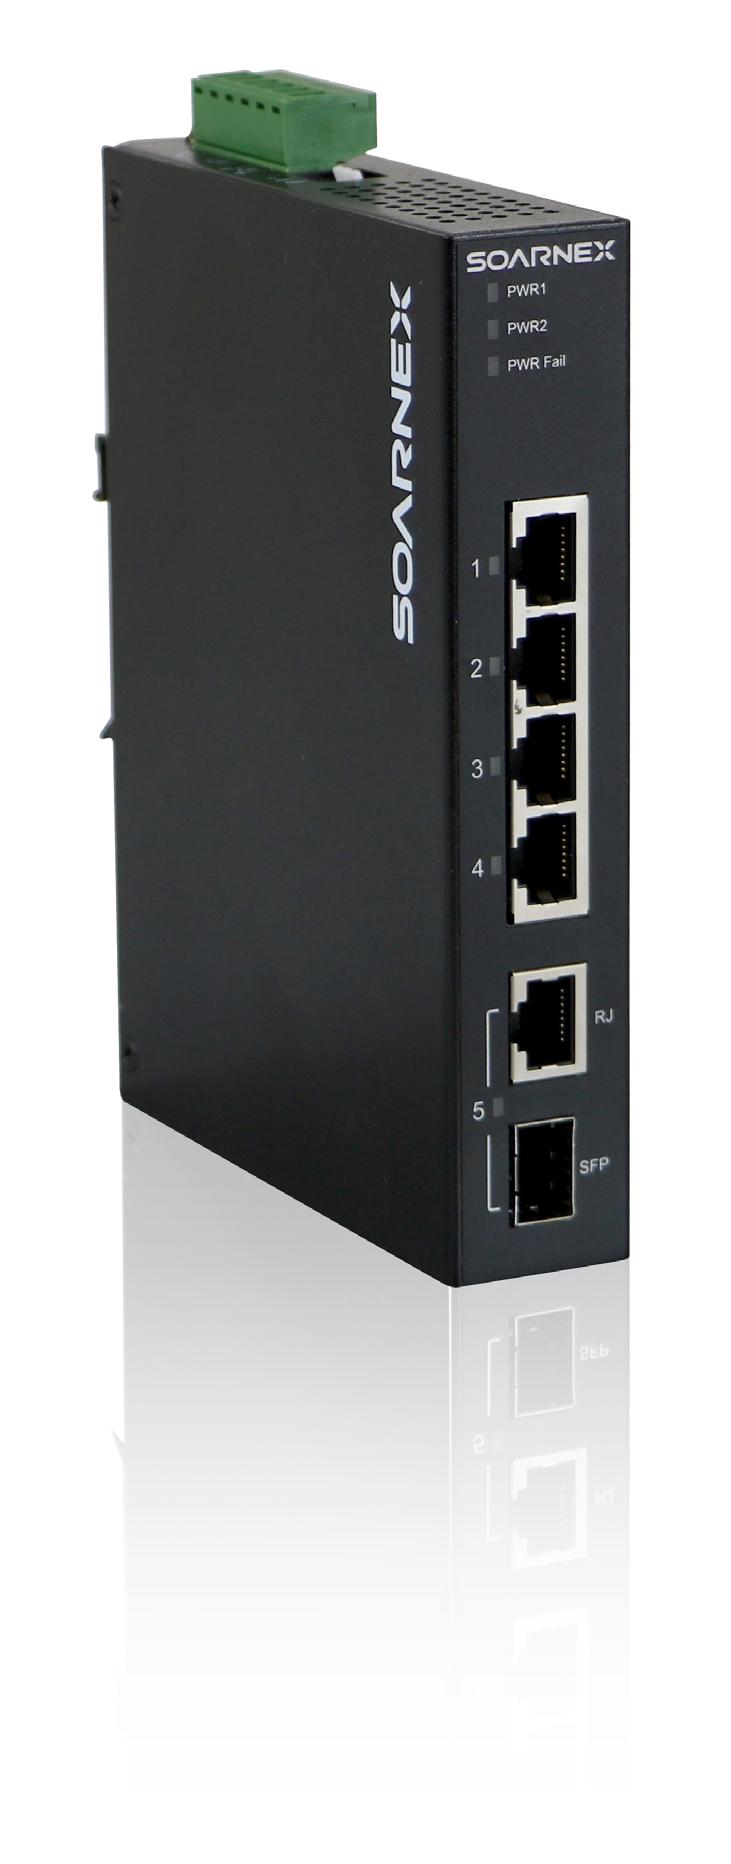 5-Port Hardened Industrial Gigabit DIN-Rail Switch IS120-05-SFP Slim Type Designed for rugged environment The IS110-05-SFP is a compact size Industrial Fast Ethernet Switch provides 4-port